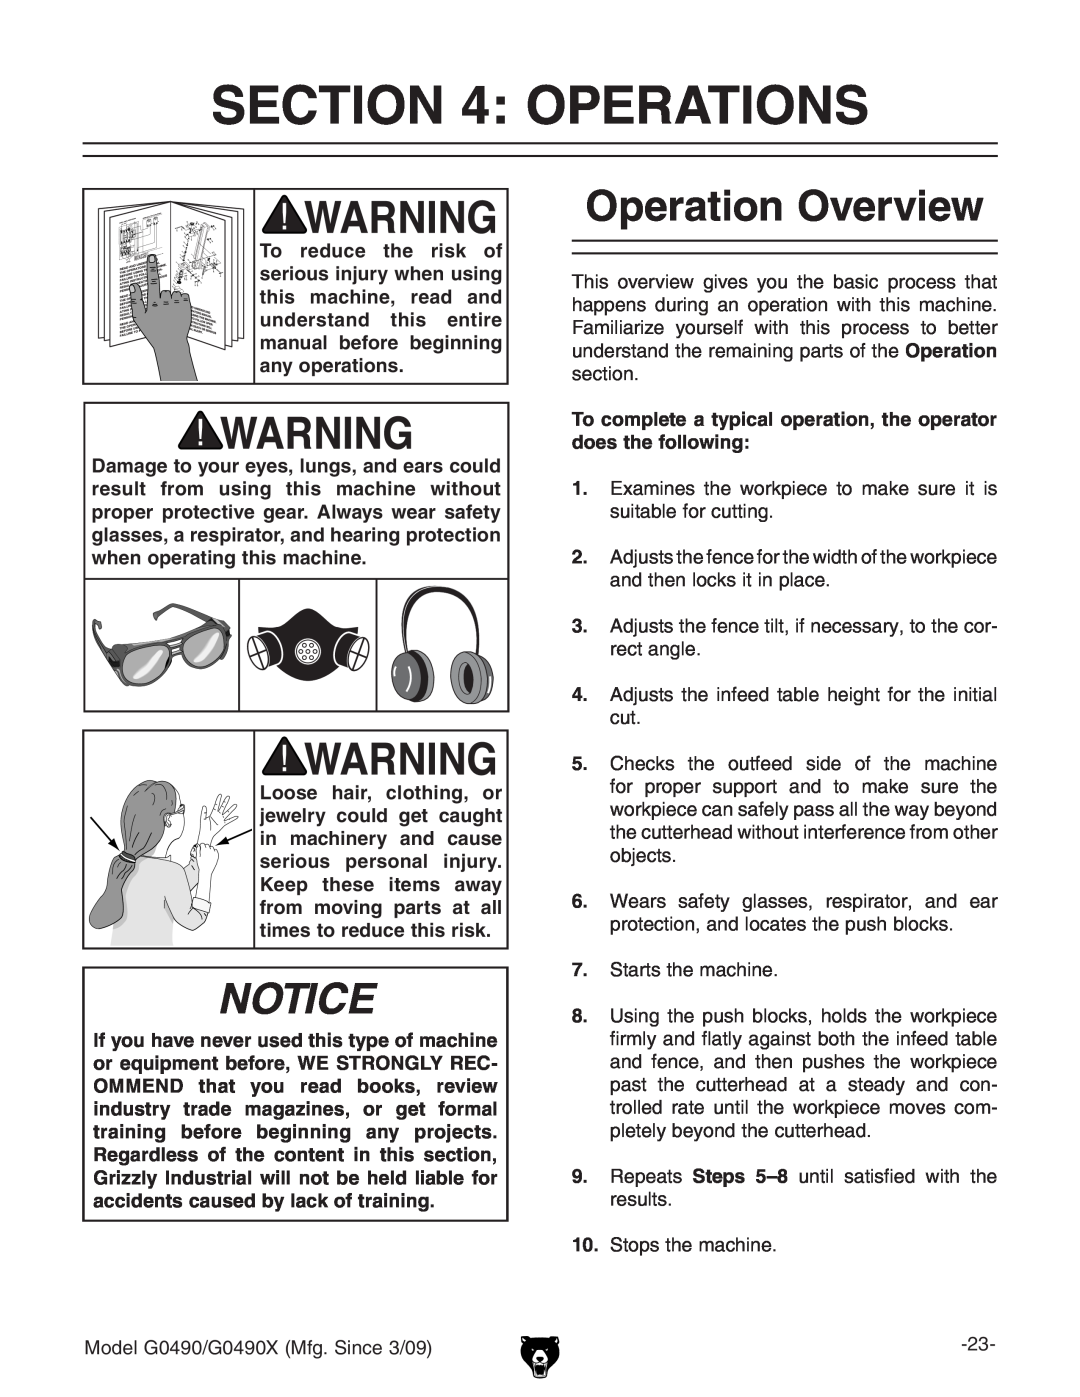 Grizzly G0490 Operations, Operation Overview, Loose hair, clothing, or jewelry could get caught, 7. HiVgihiZbVXcZ# 